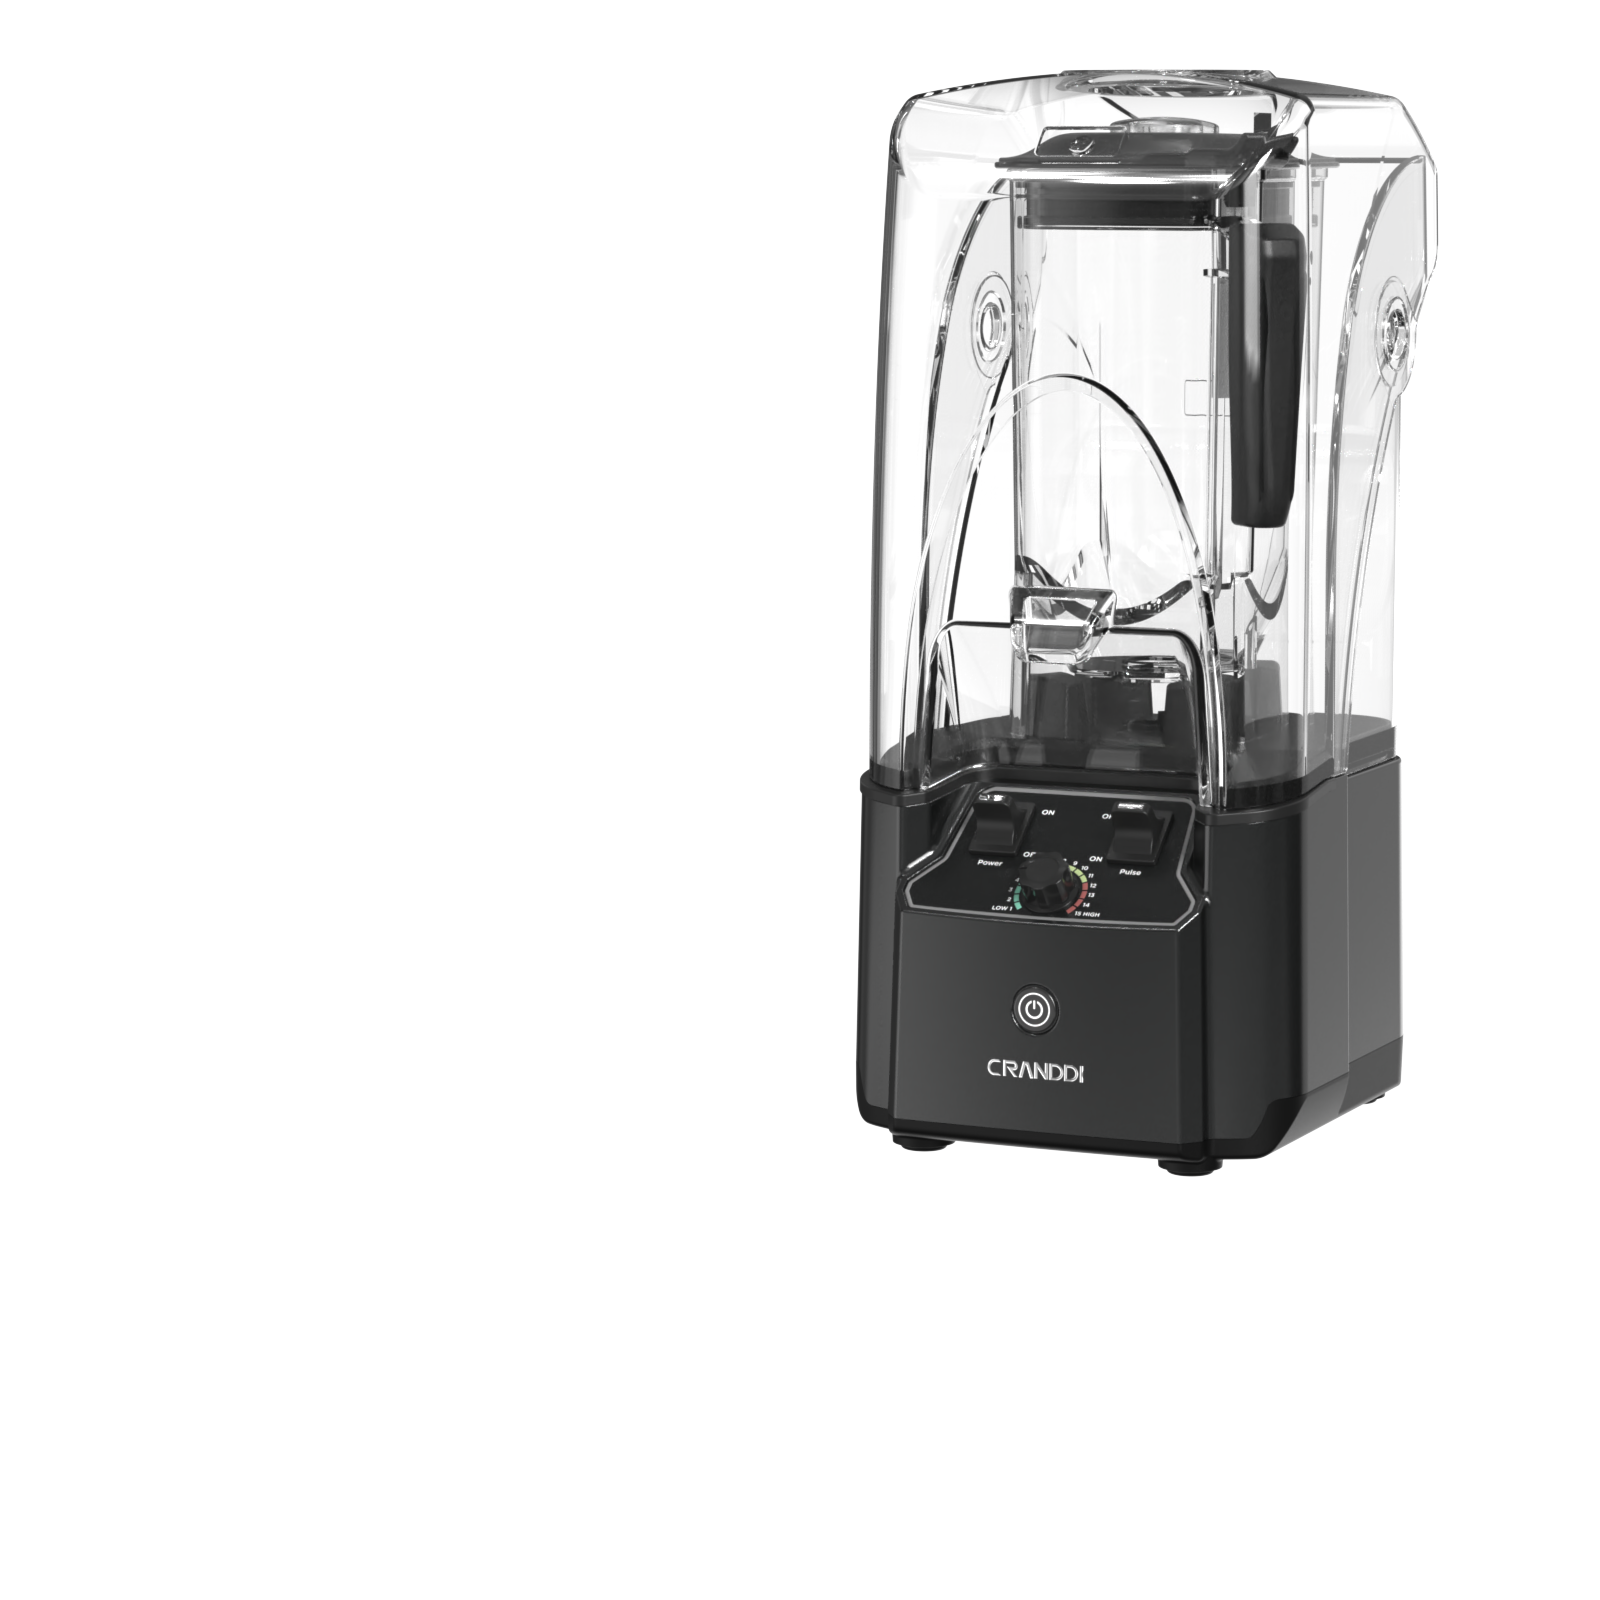 CRANDDI Professional Smoothie Blender, 2200W Commercial Soundproof Quiet  blender with Removable Soundproof Shield for Crushing Ice, MilkShakes,  Puree